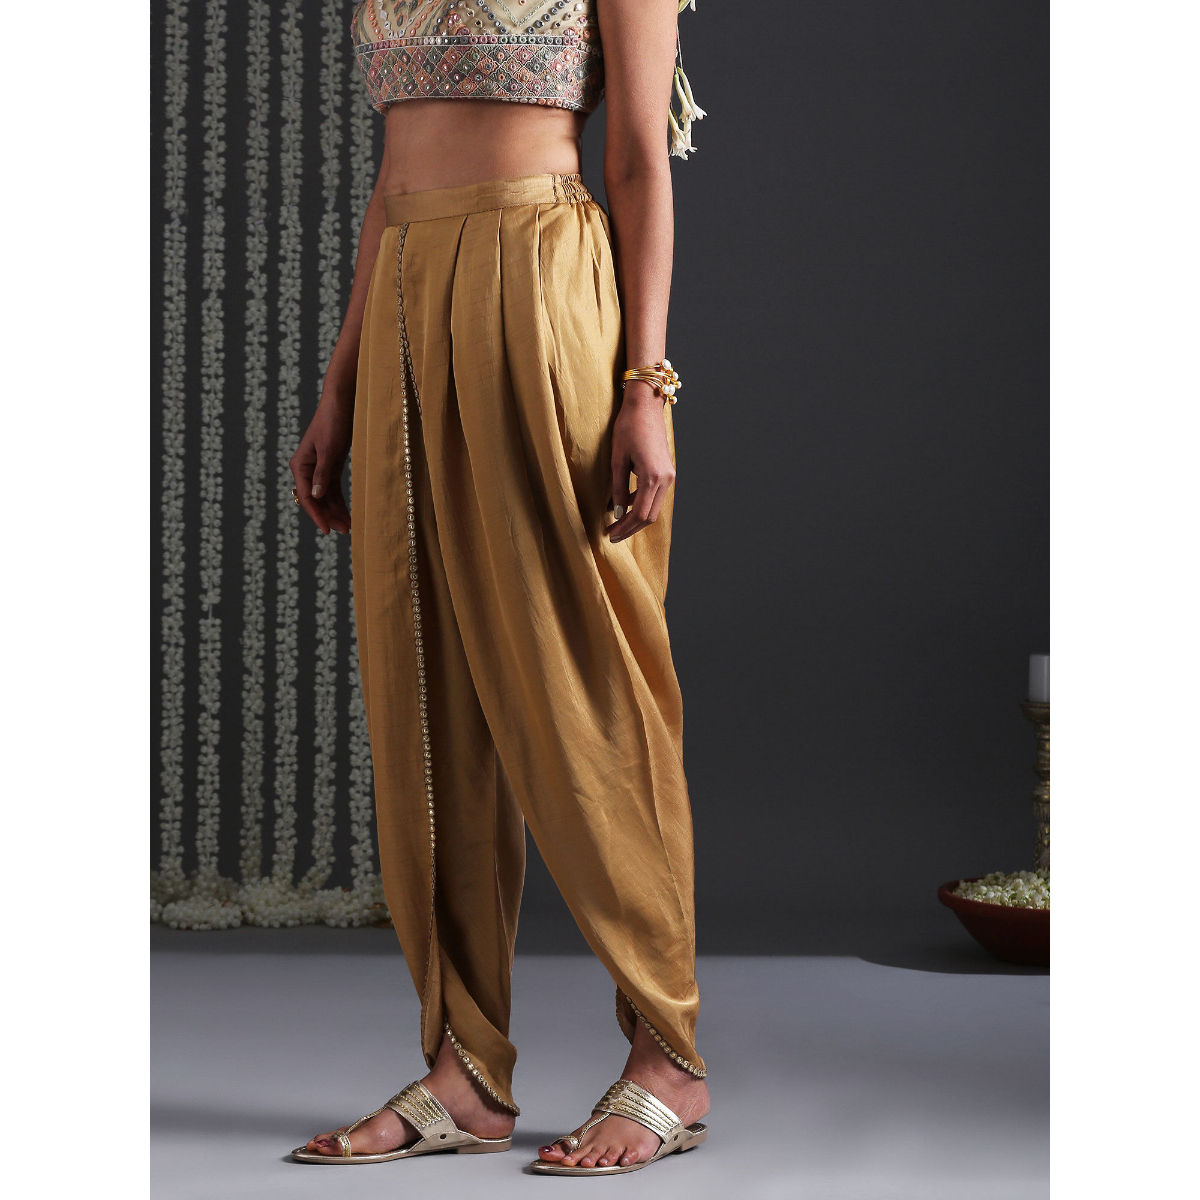 Buy Larwa Blended Solid Regular Dhoti - Beige Online at Low Prices in India  - Paytmmall.com